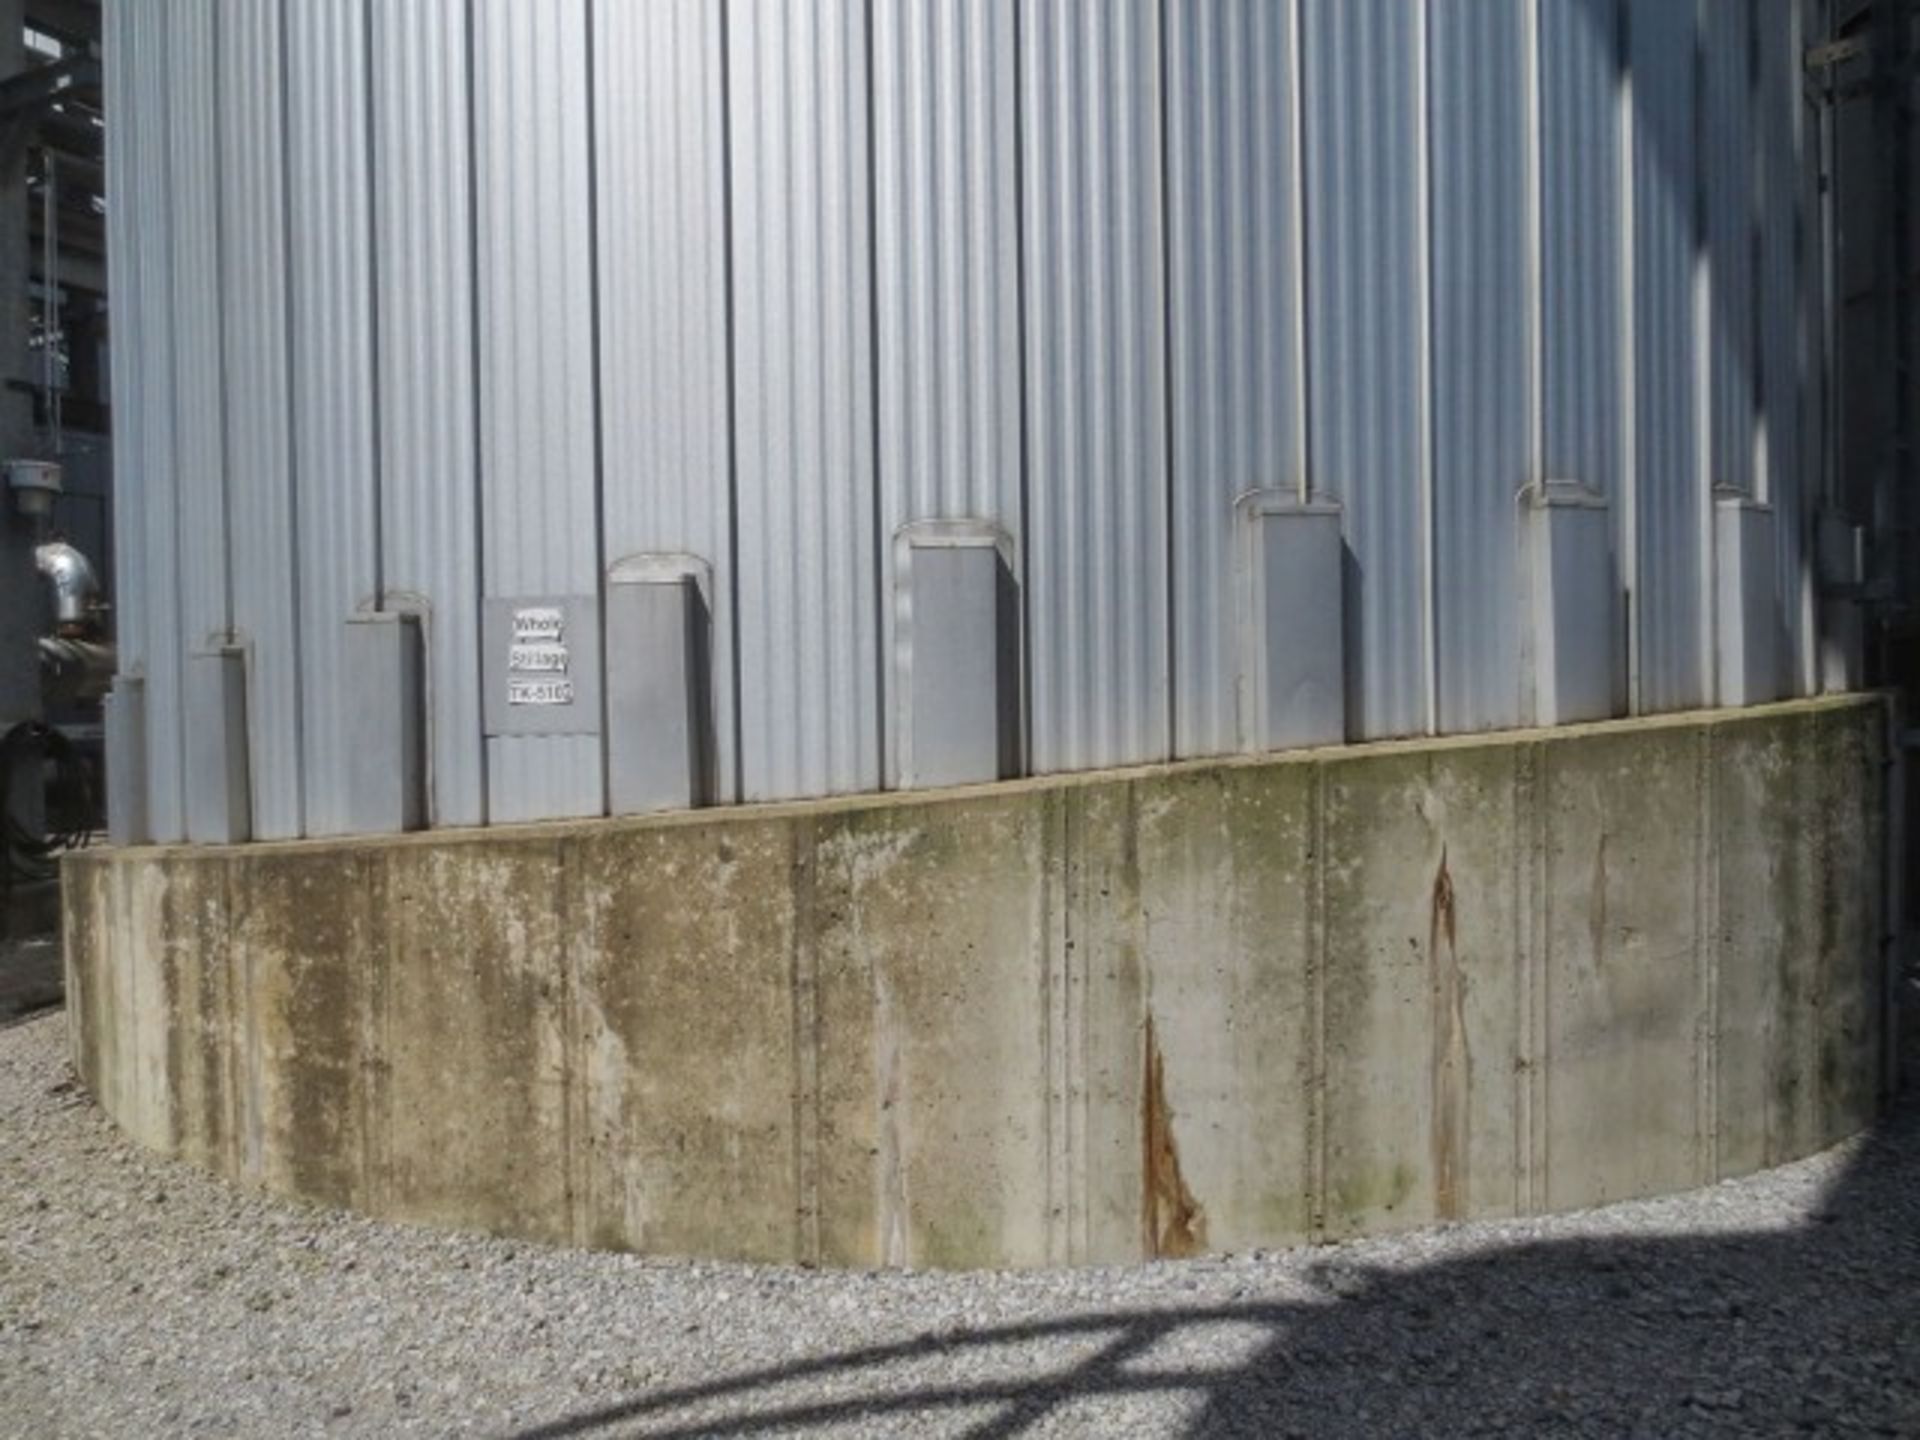 Vertical tank stainless steel 304 AP 650I rated. MAWP at 0.25 psig at 300F. Size is 28'-6" dia x 38' - Image 4 of 6